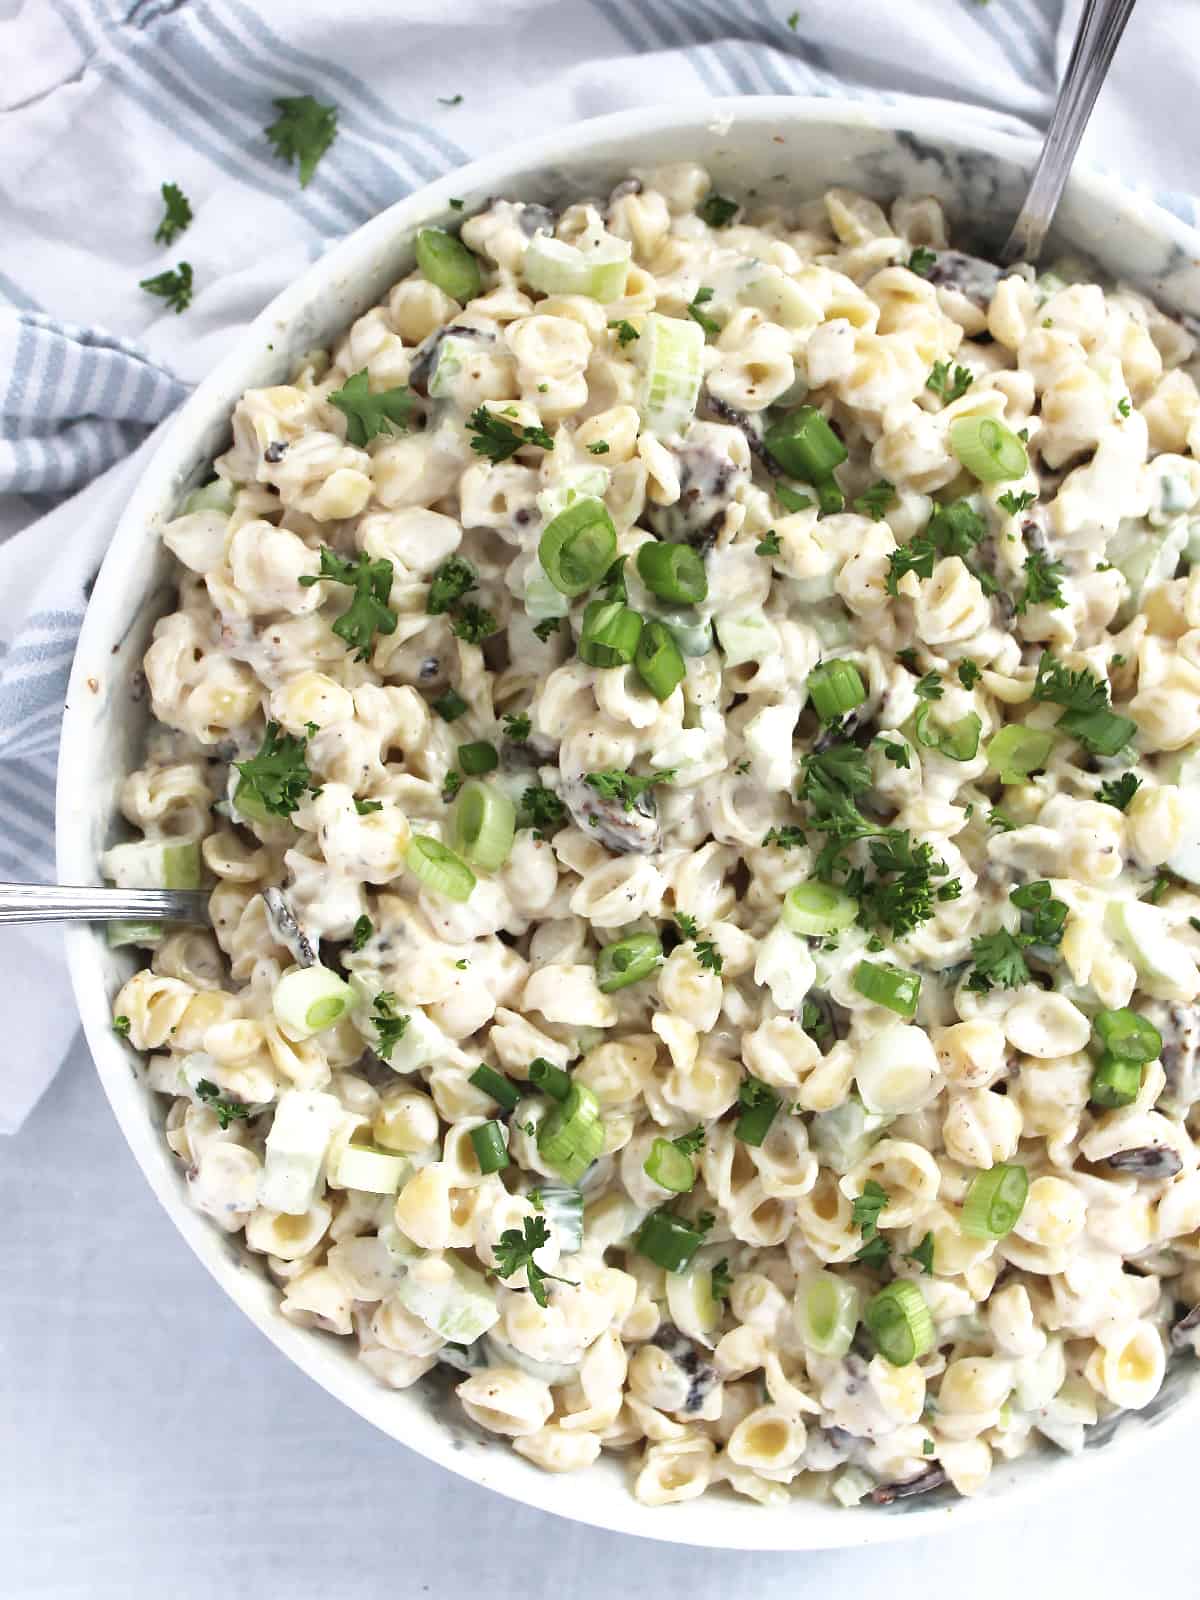 Creamy pasta salad topped with green onions and fresh herbs.